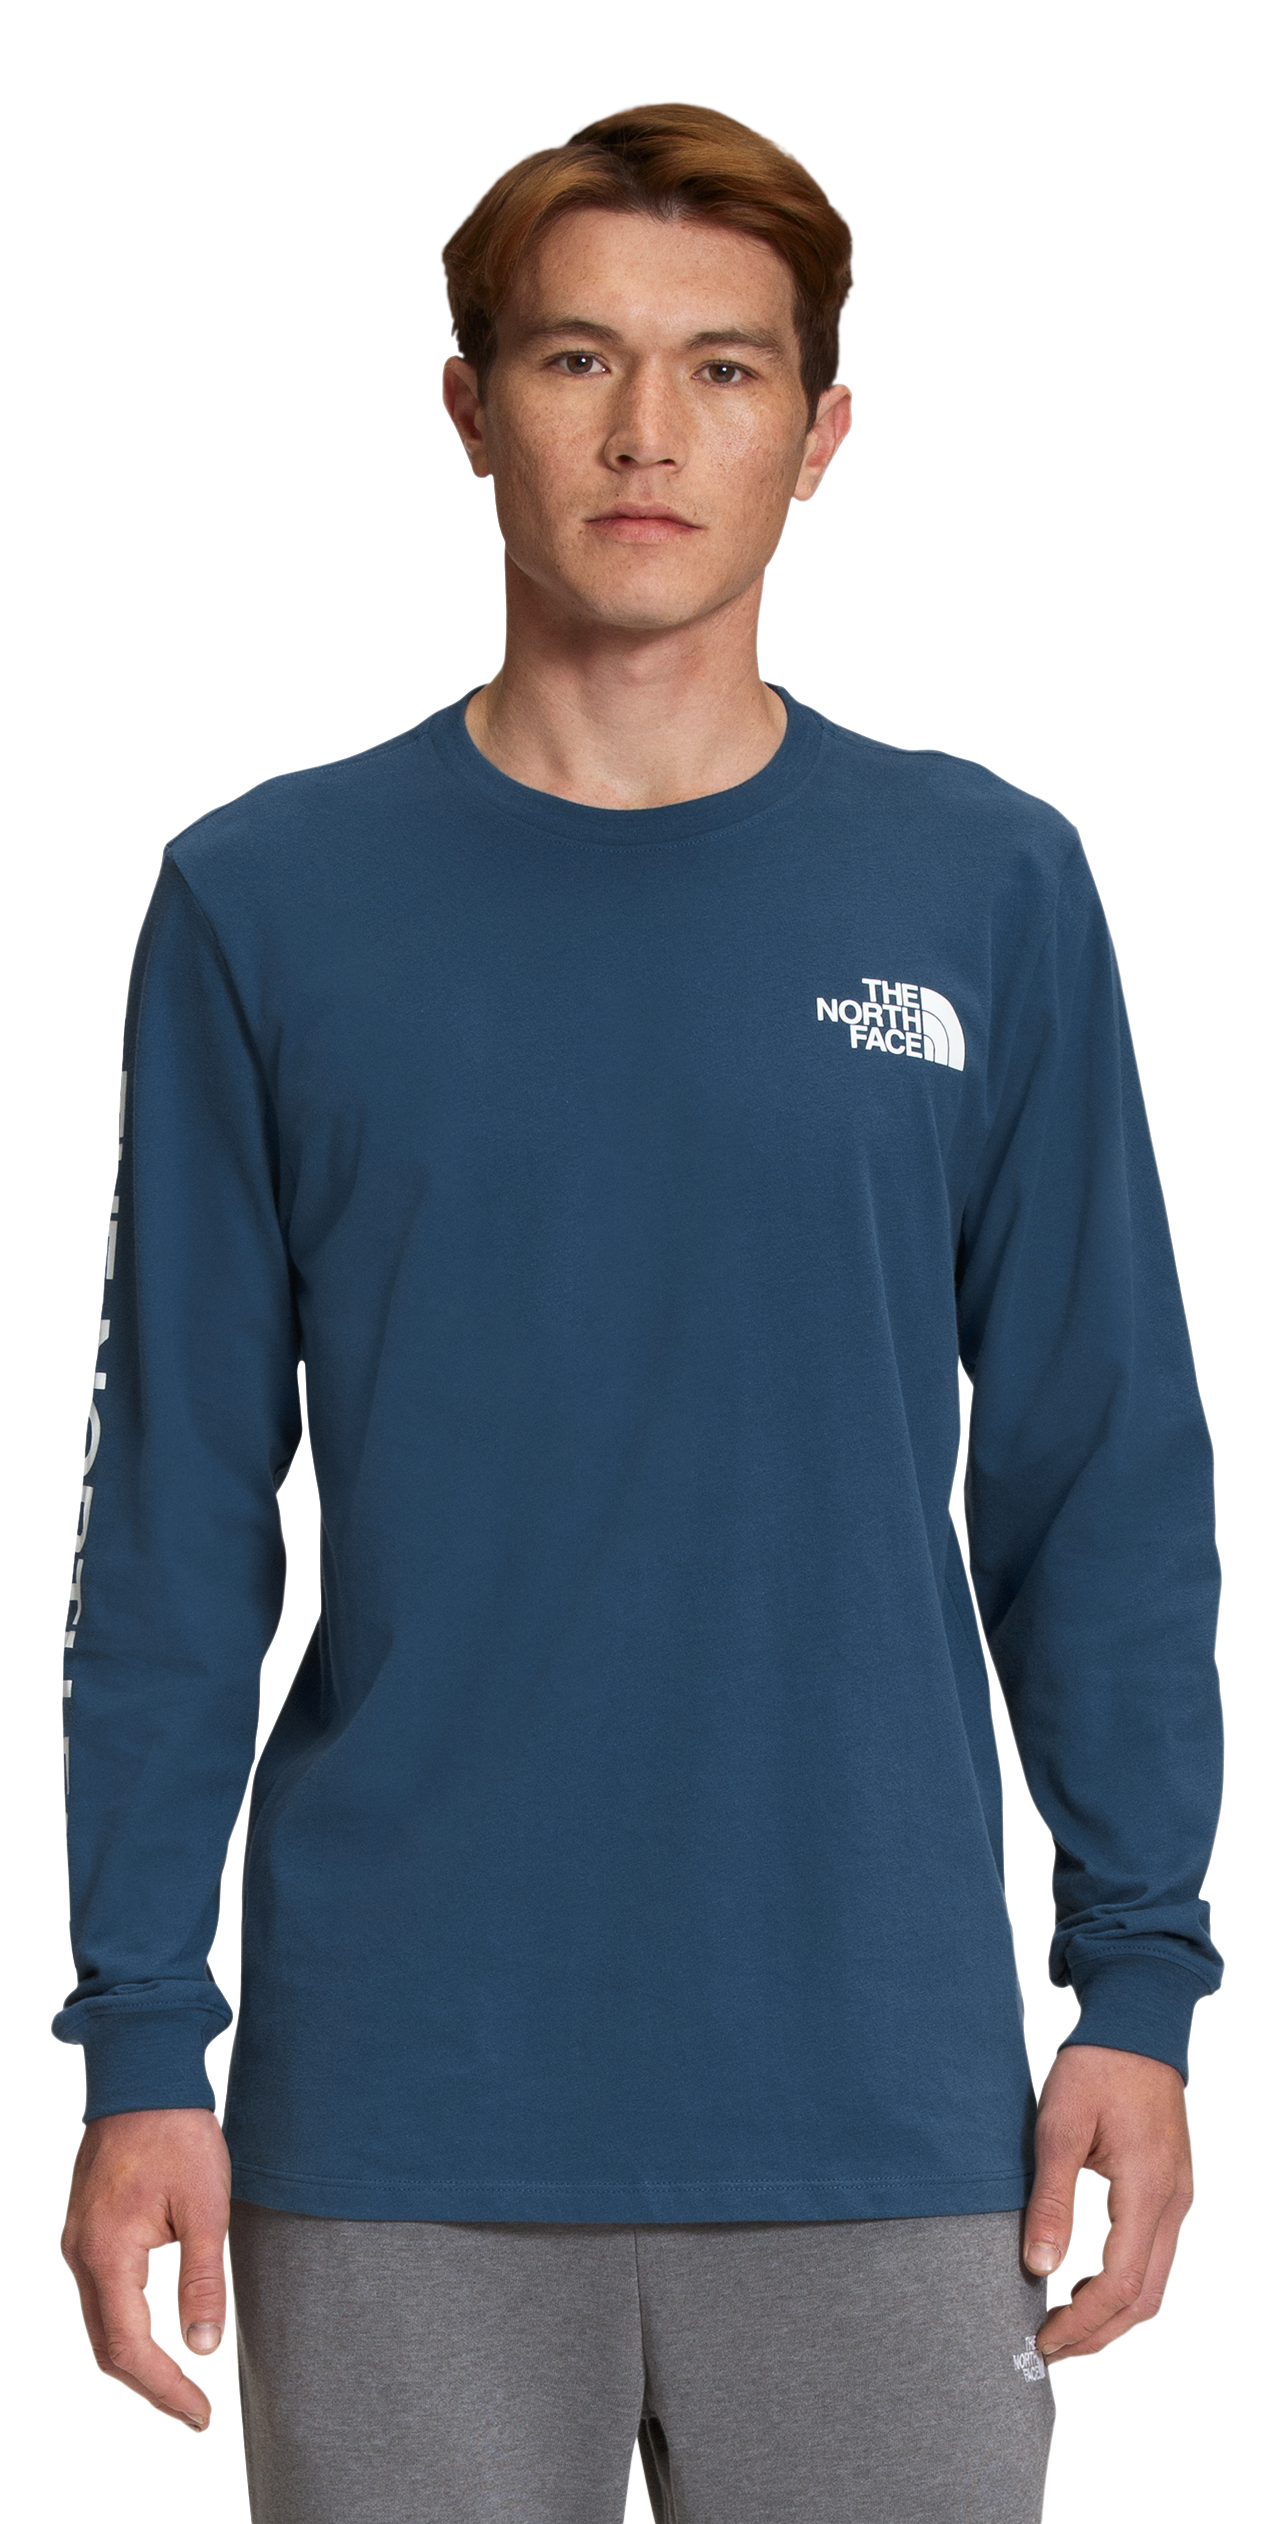 The North Face TNF Sleeve Hit Long-Sleeve T-Shirt for Men - shady Blue/TNF White - M